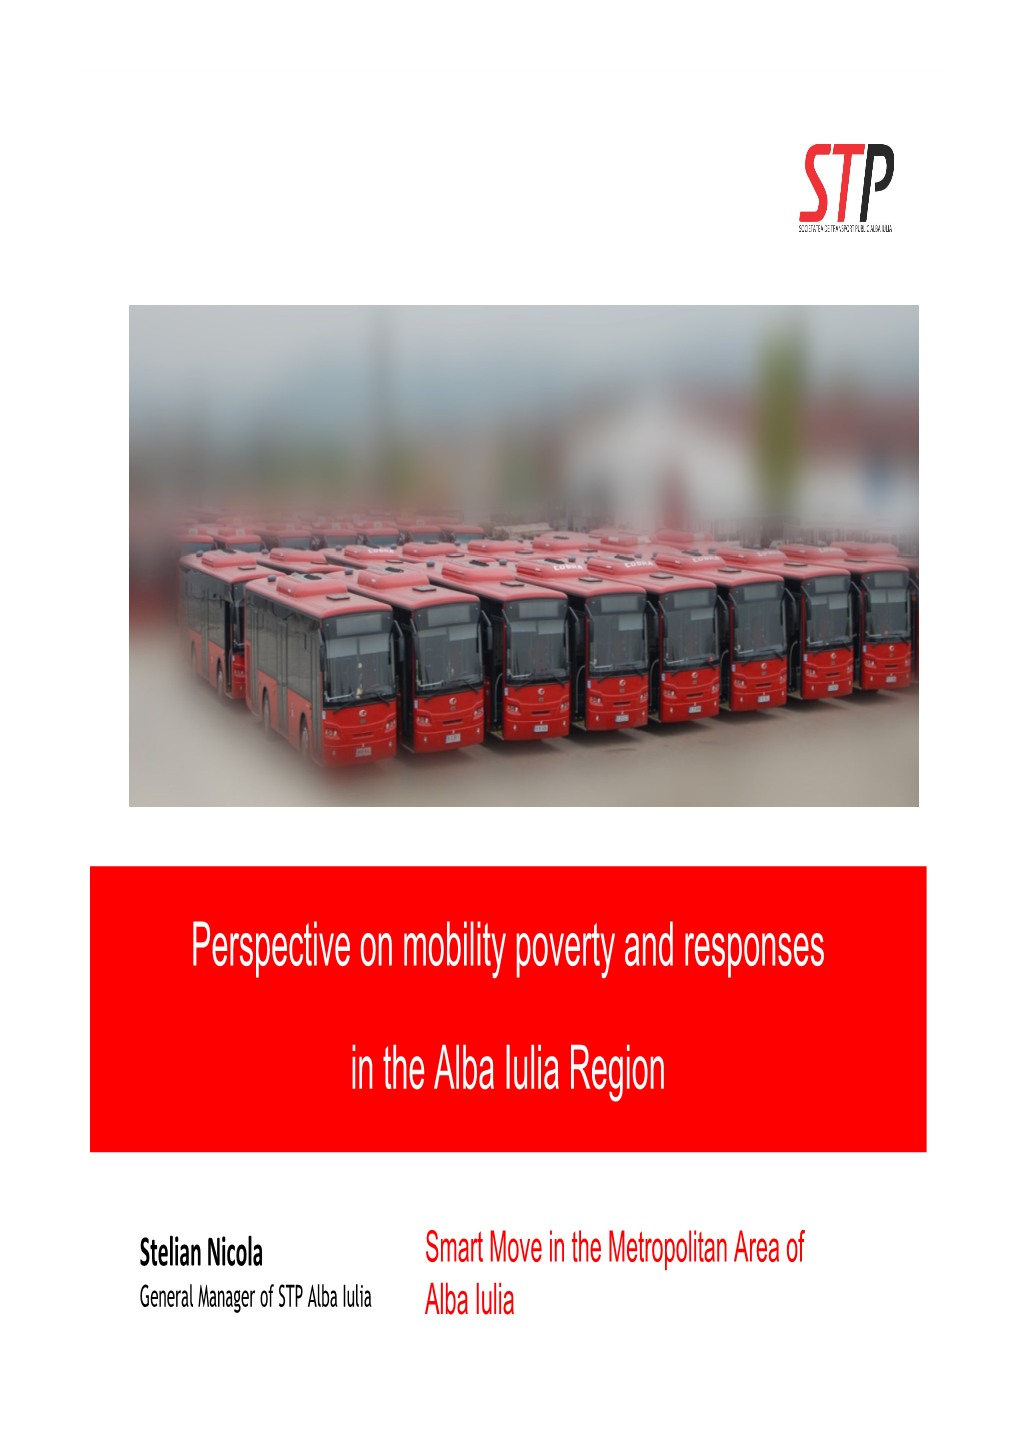 Perspective on Mobility Poverty and Responses in the Alba Iulia Region